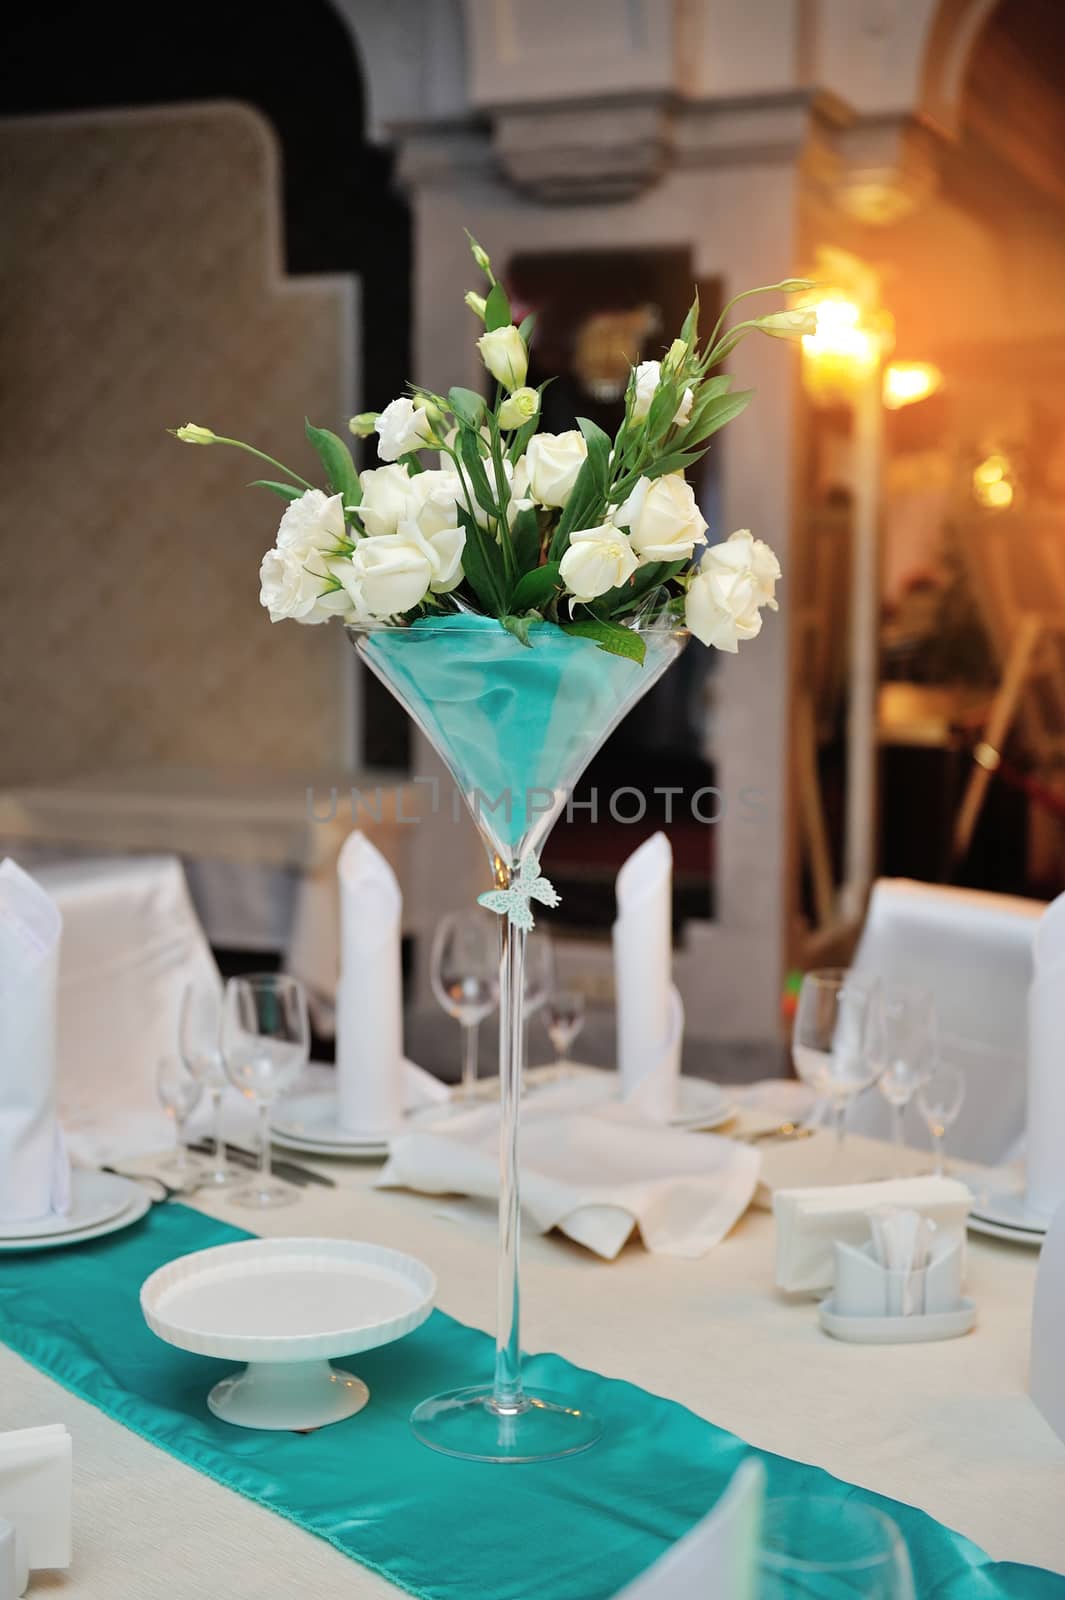 wedding decorations in the restaurant with flowers on table.